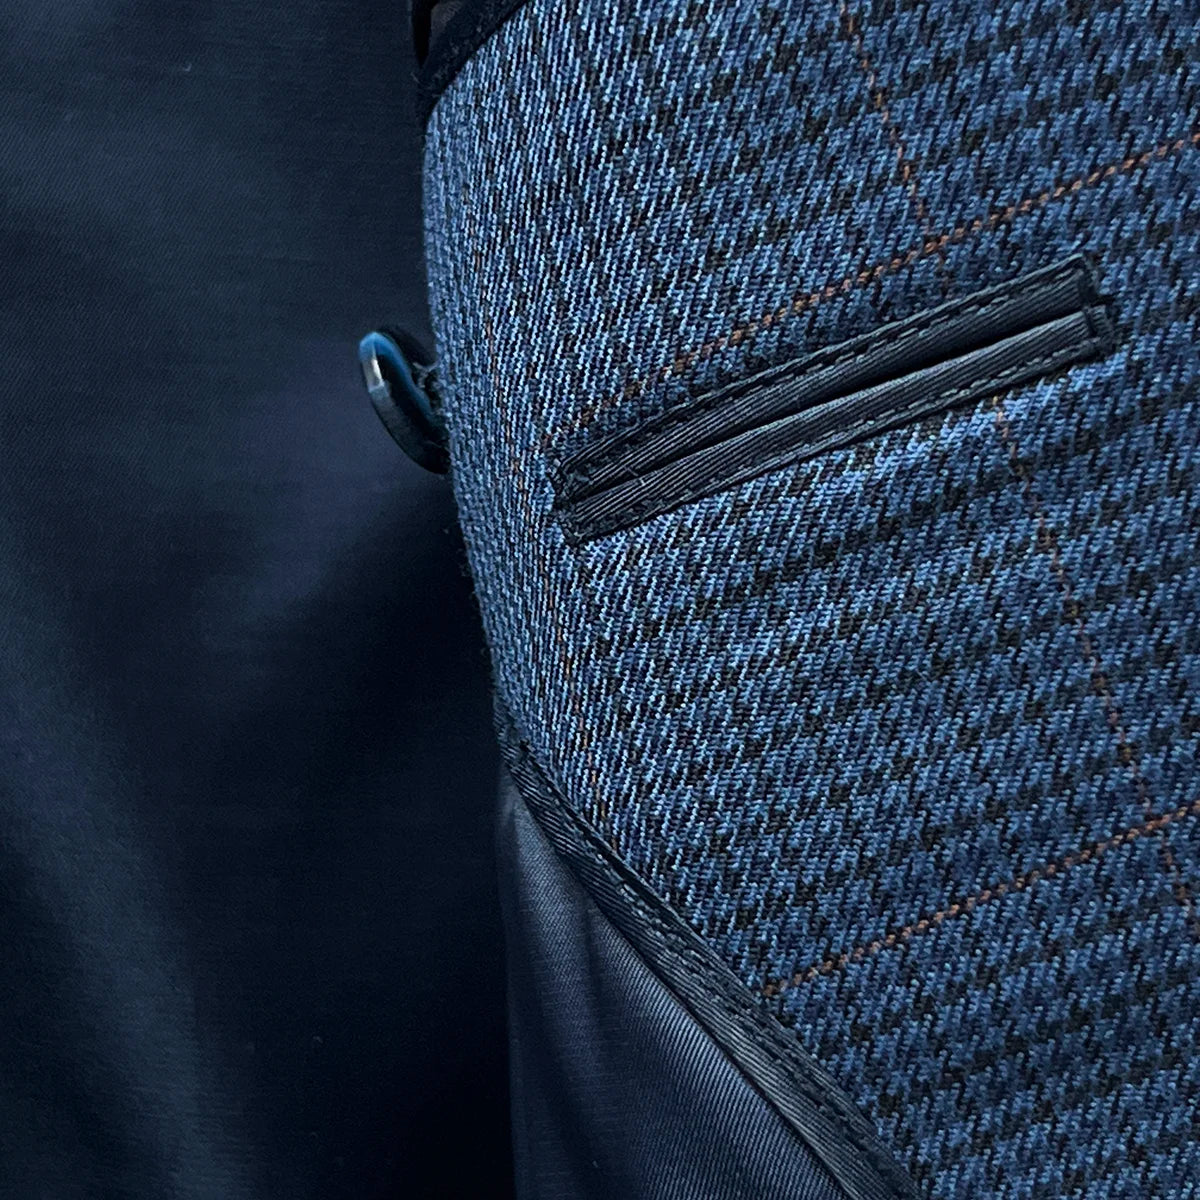 Dark blue bemberg lining of the prussian blue suit jacket, ensuring comfort and a premium feel.